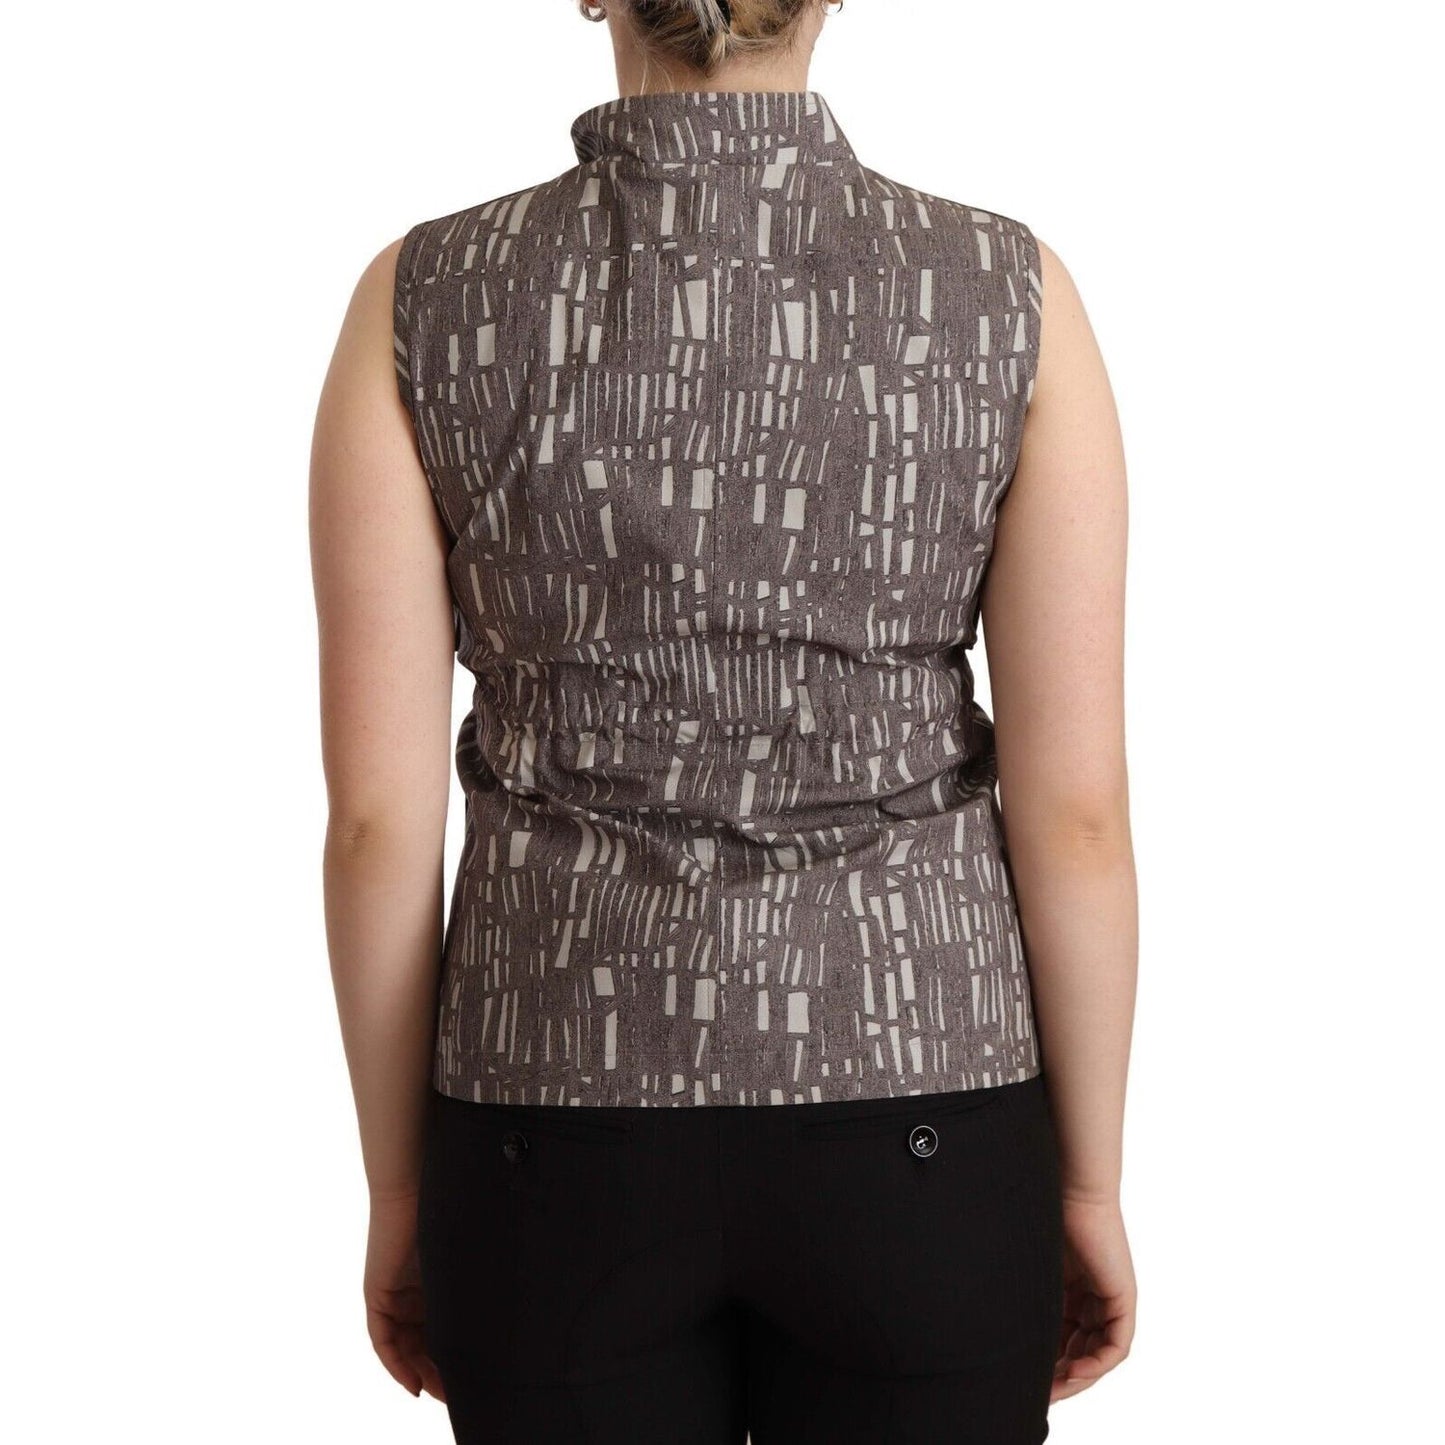 Comeforbreakfast Sleeveless Turtleneck Chic Top WOMAN TOPS AND SHIRTS brown-black-vest-leather-sleeveless-top-blouse